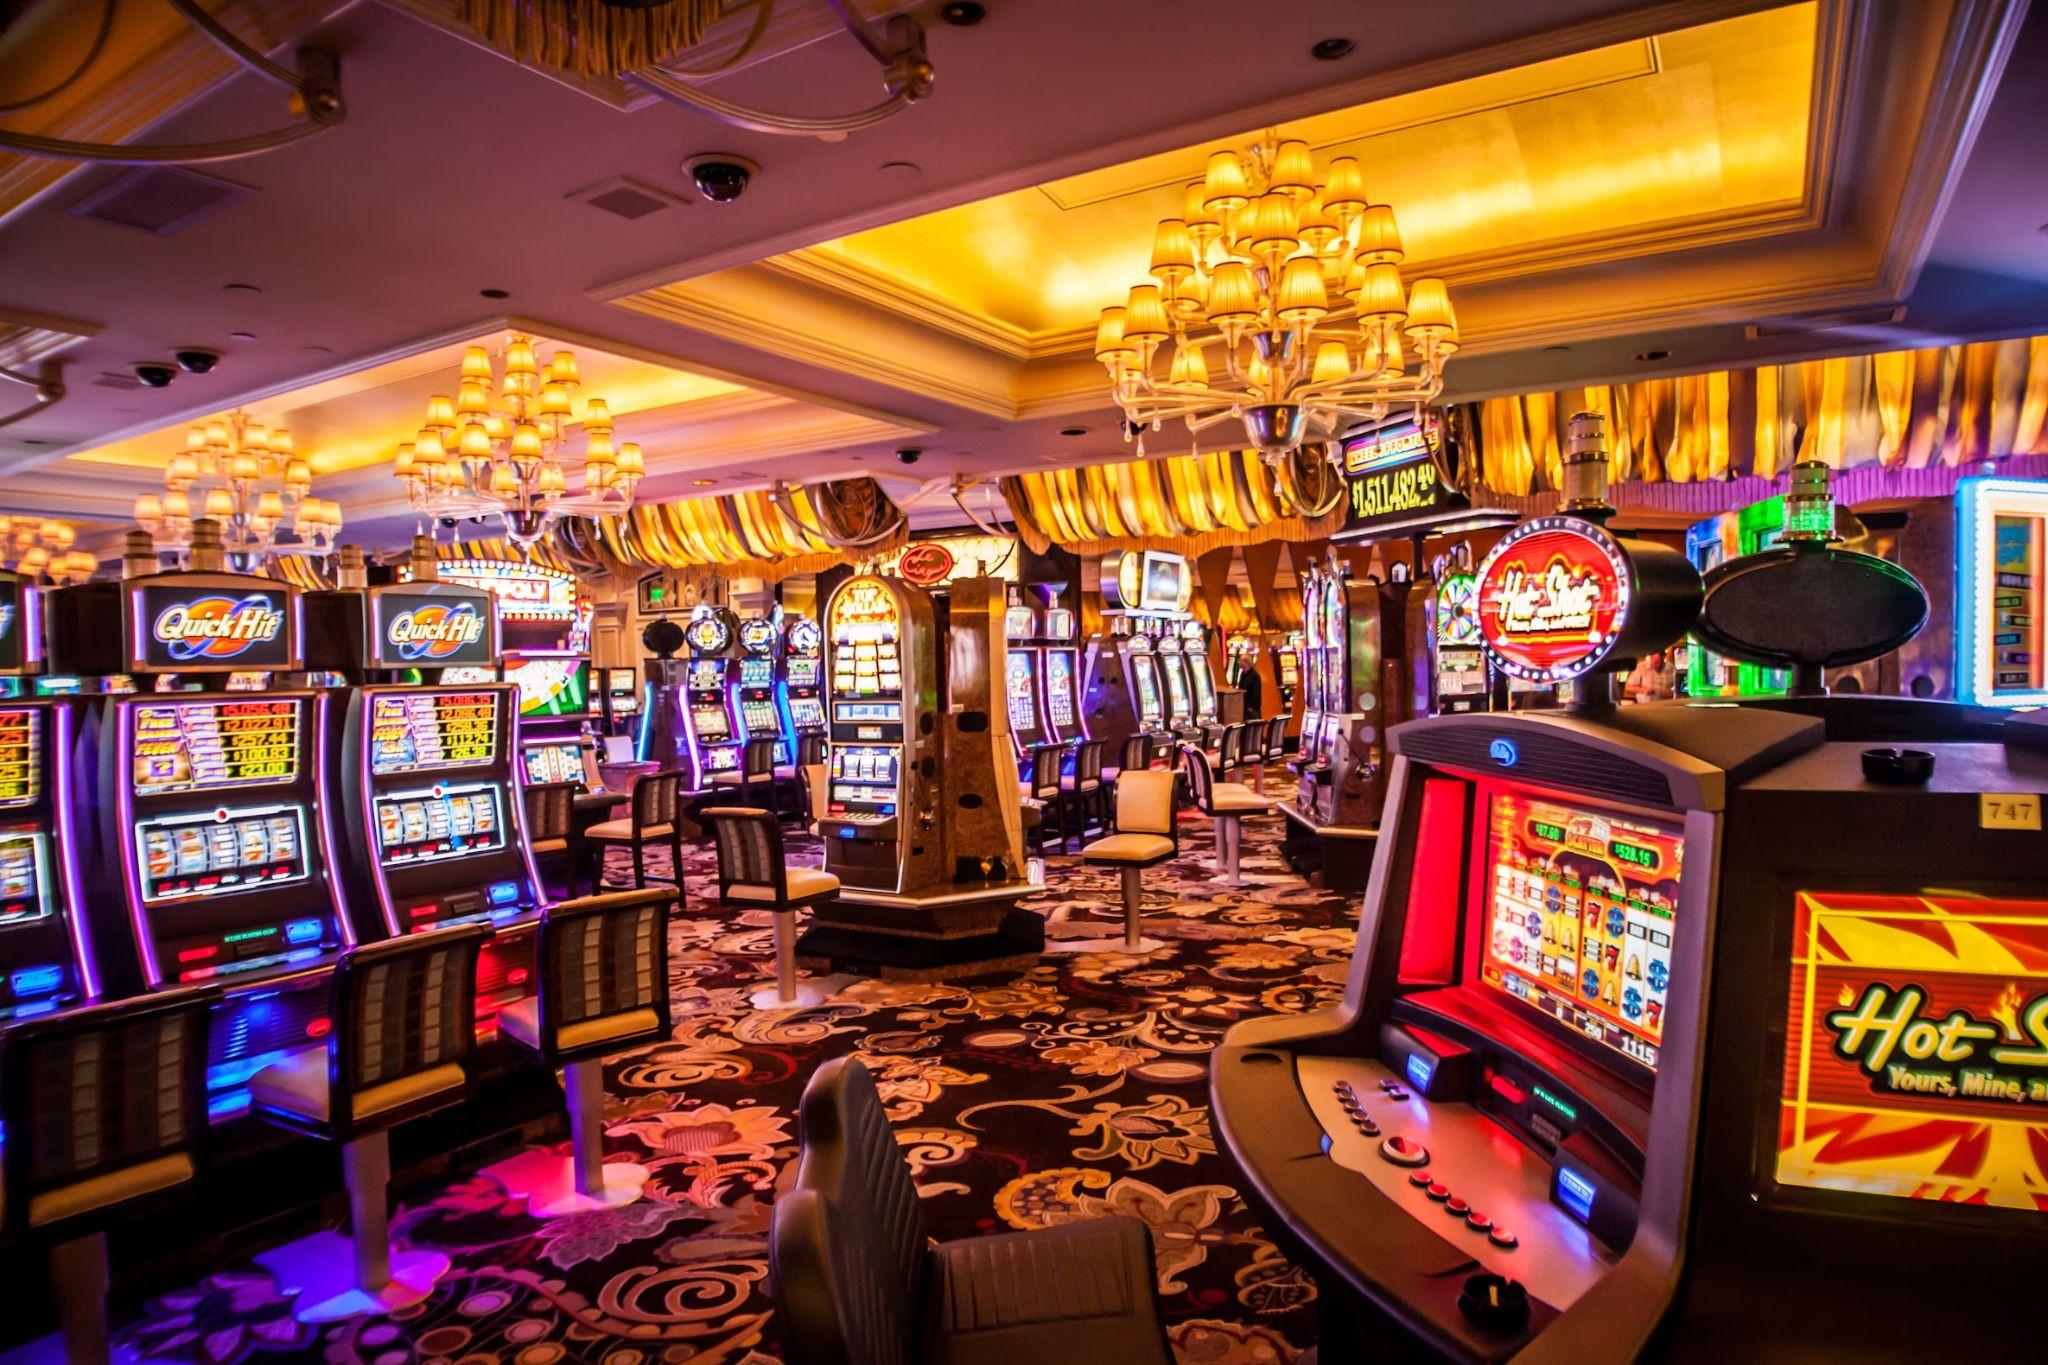 Ever Wondered Why Millions Can't Get Enough of Social Casinos?